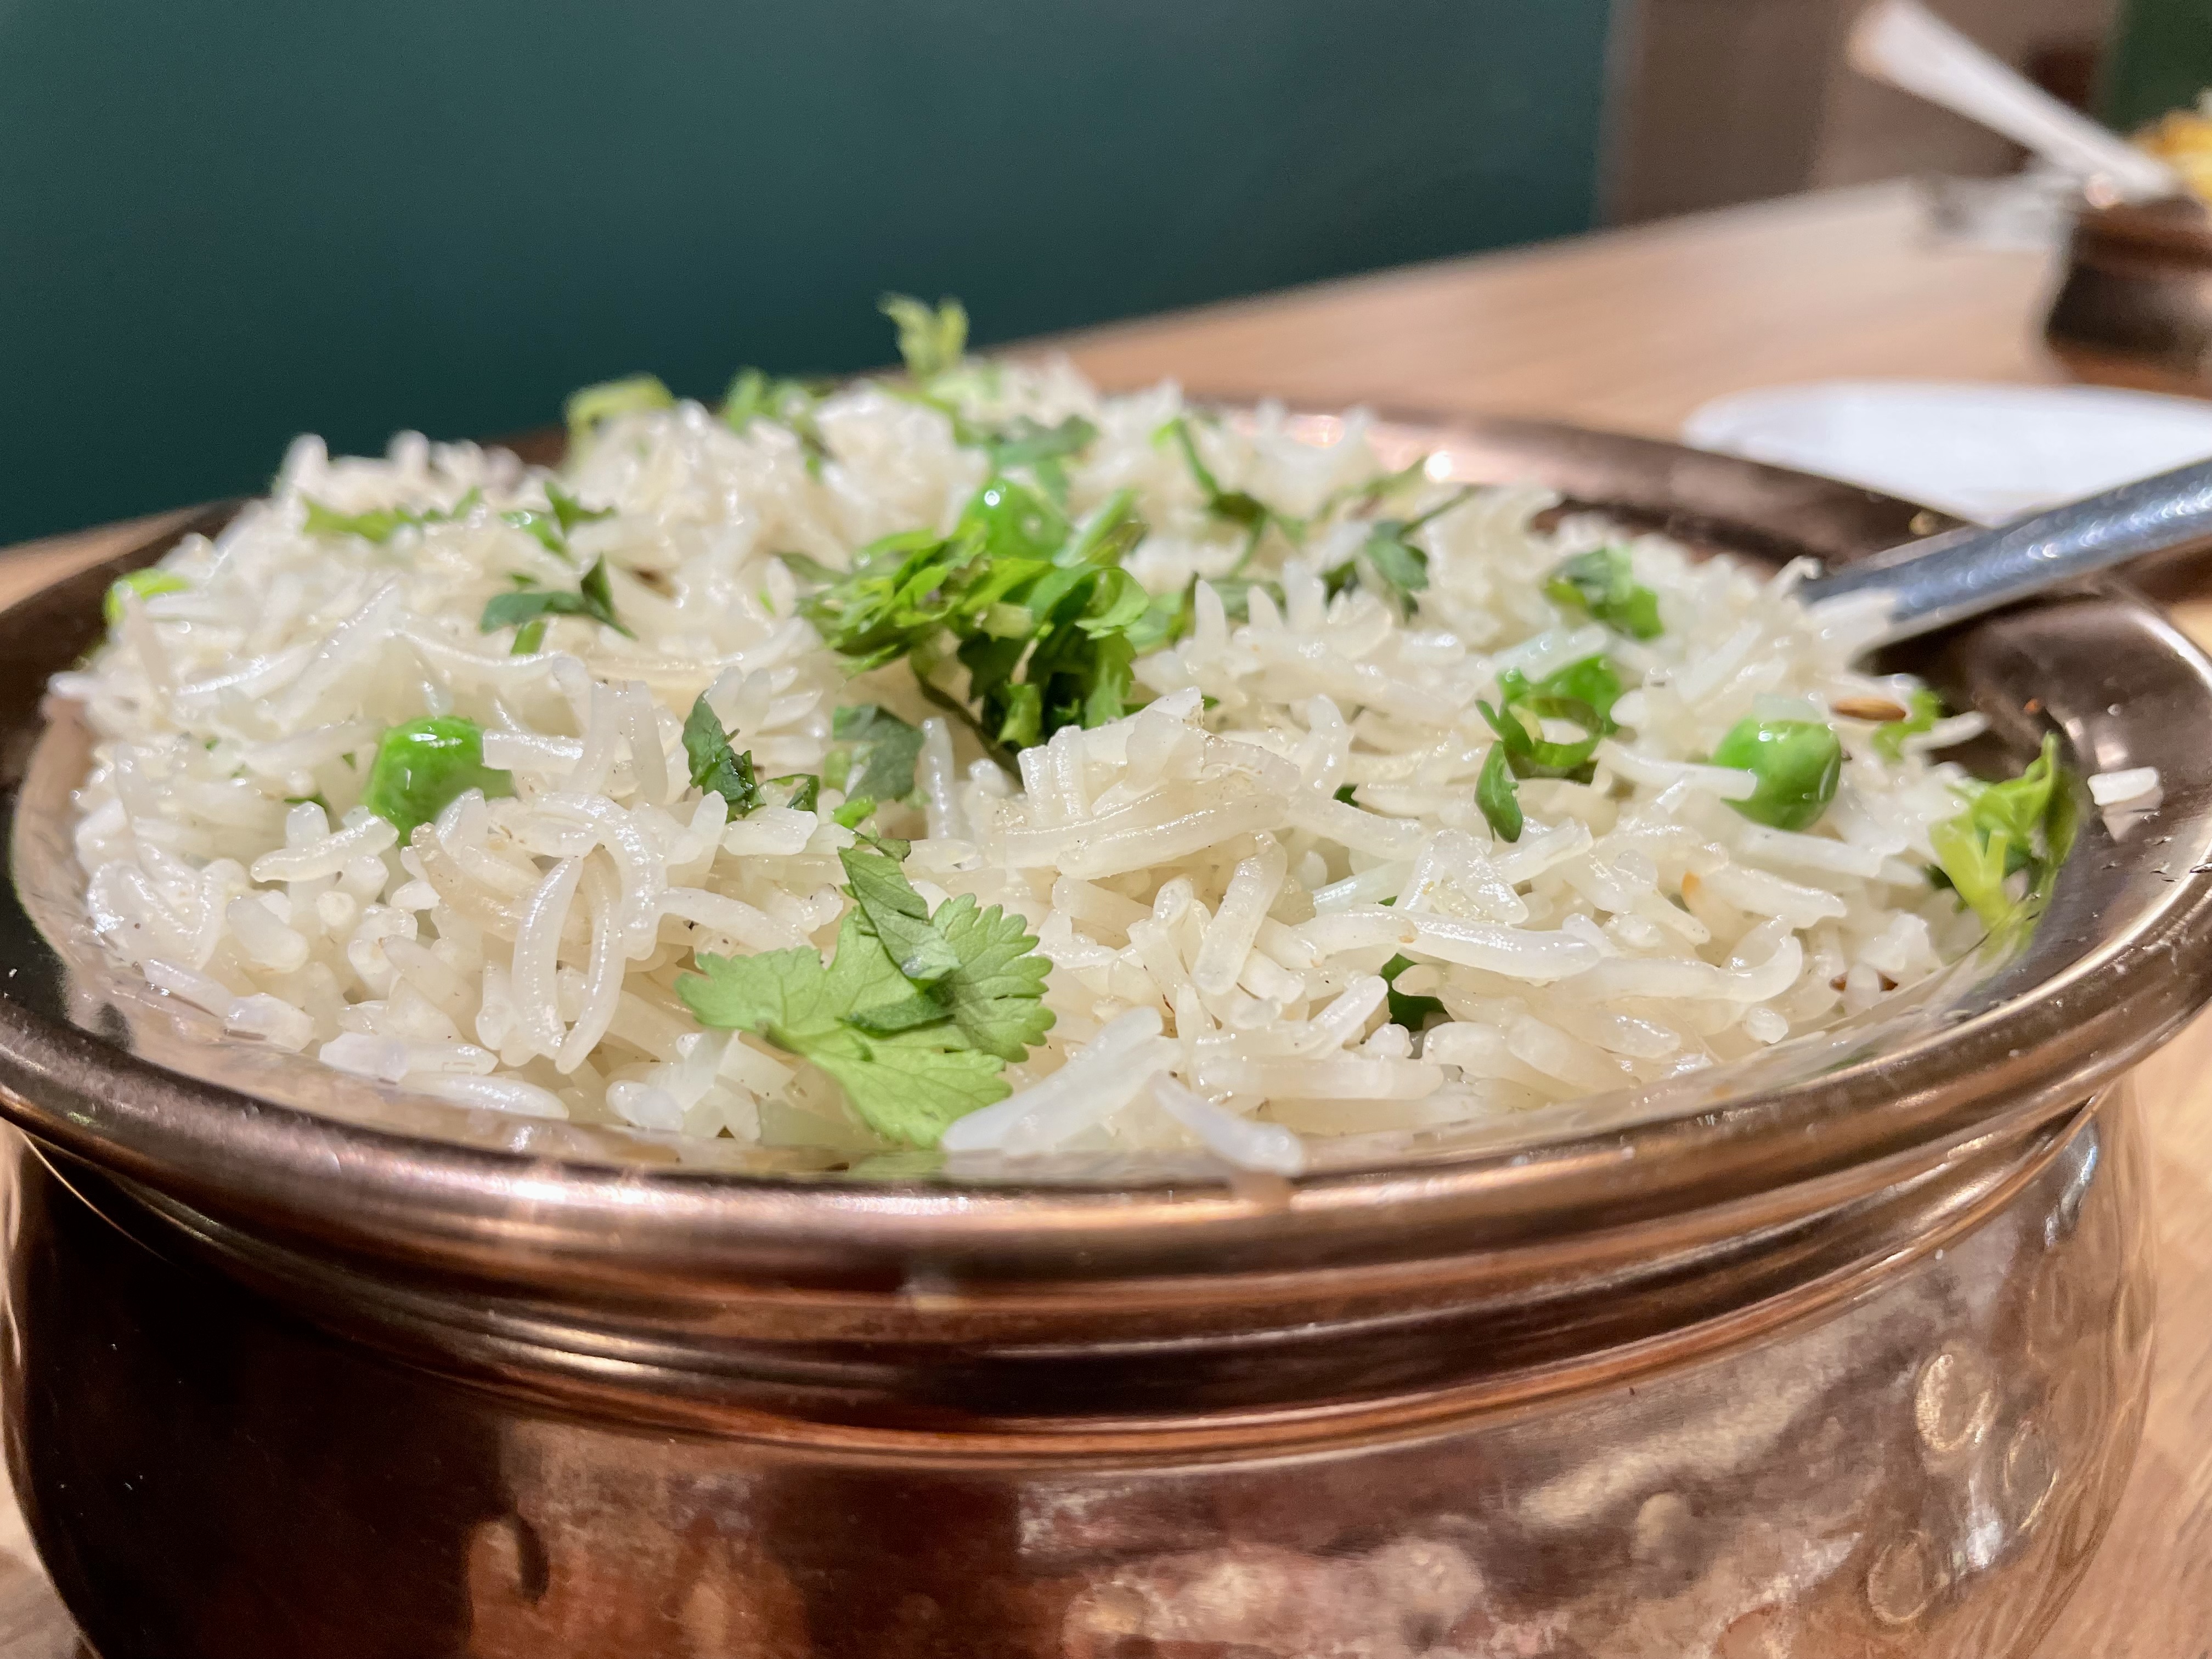 We recommend pairing the lamb rogan josh with pulao, a rice-dish made with peas and spices